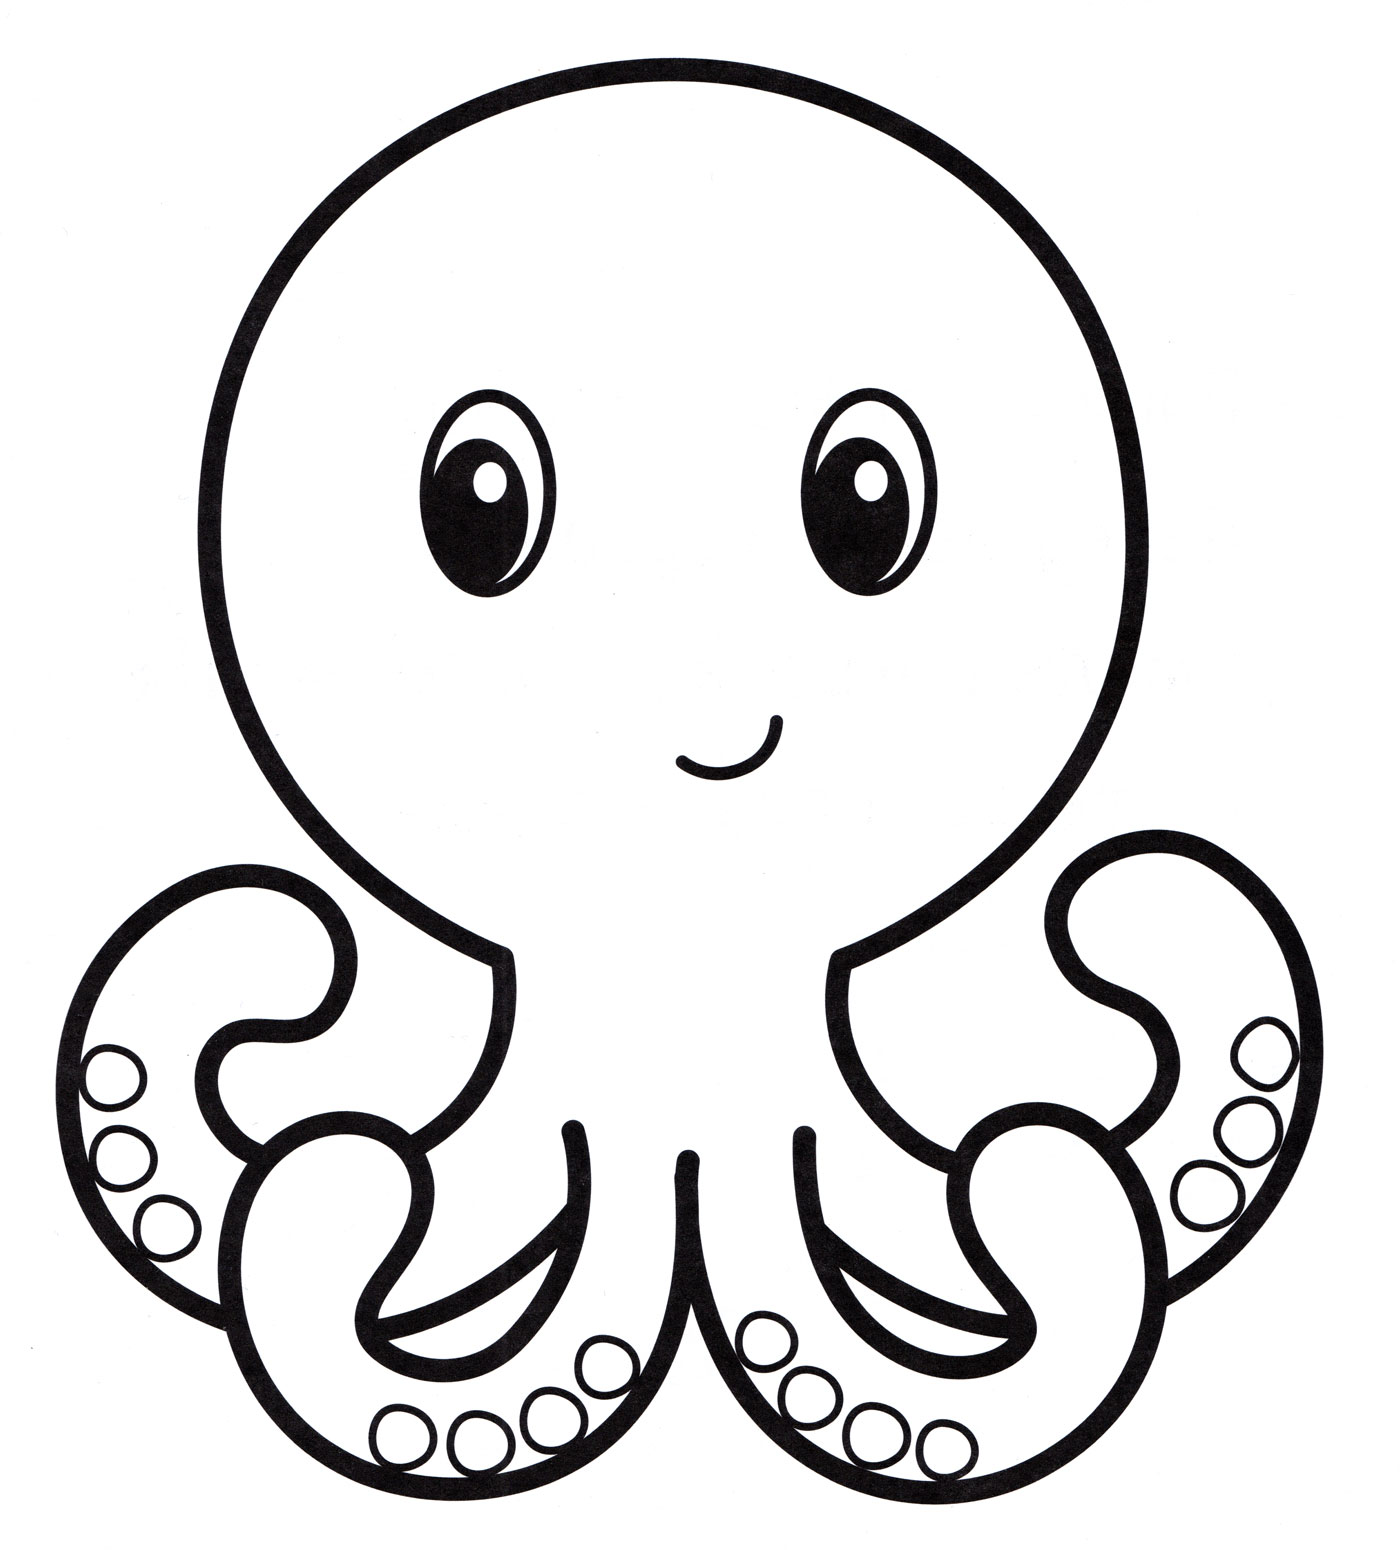 octopus-coloring-pages-octopus-coloring-pages-kids-drawing-colouring